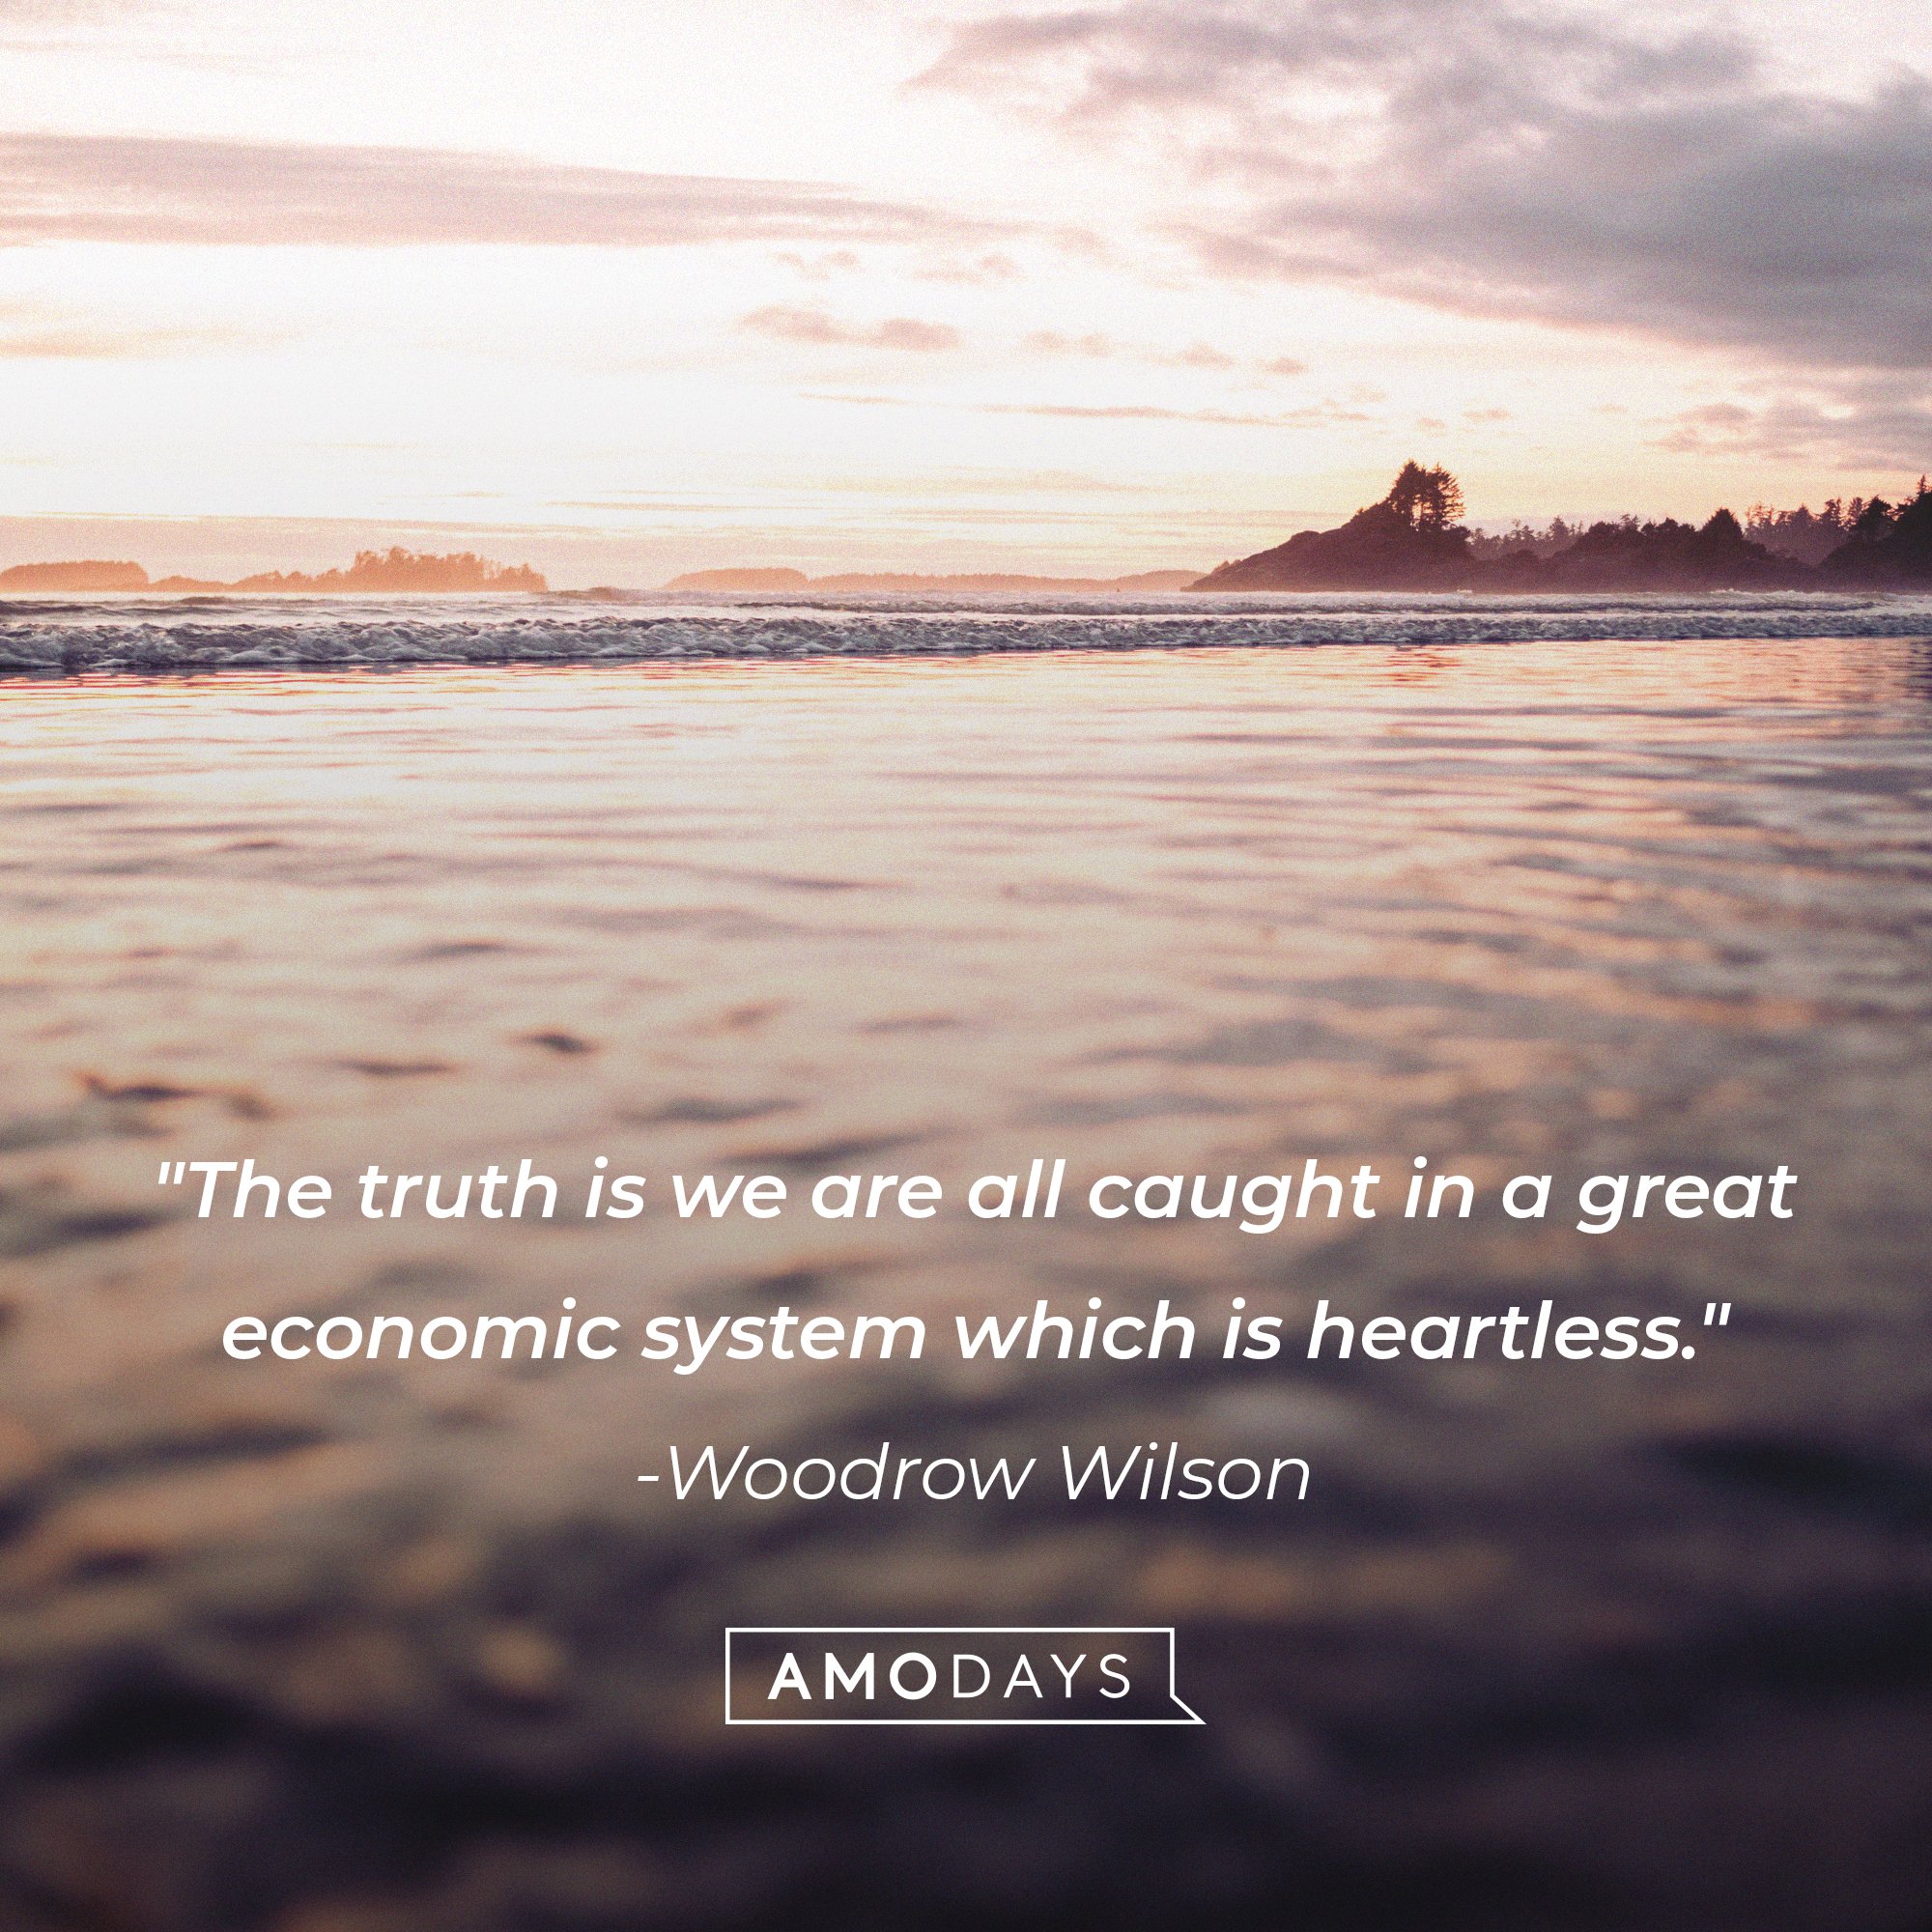 Woodrow Wilson's quote: "The truth is we are all caught in a great economic system which is heartless." | Image: AmoDays